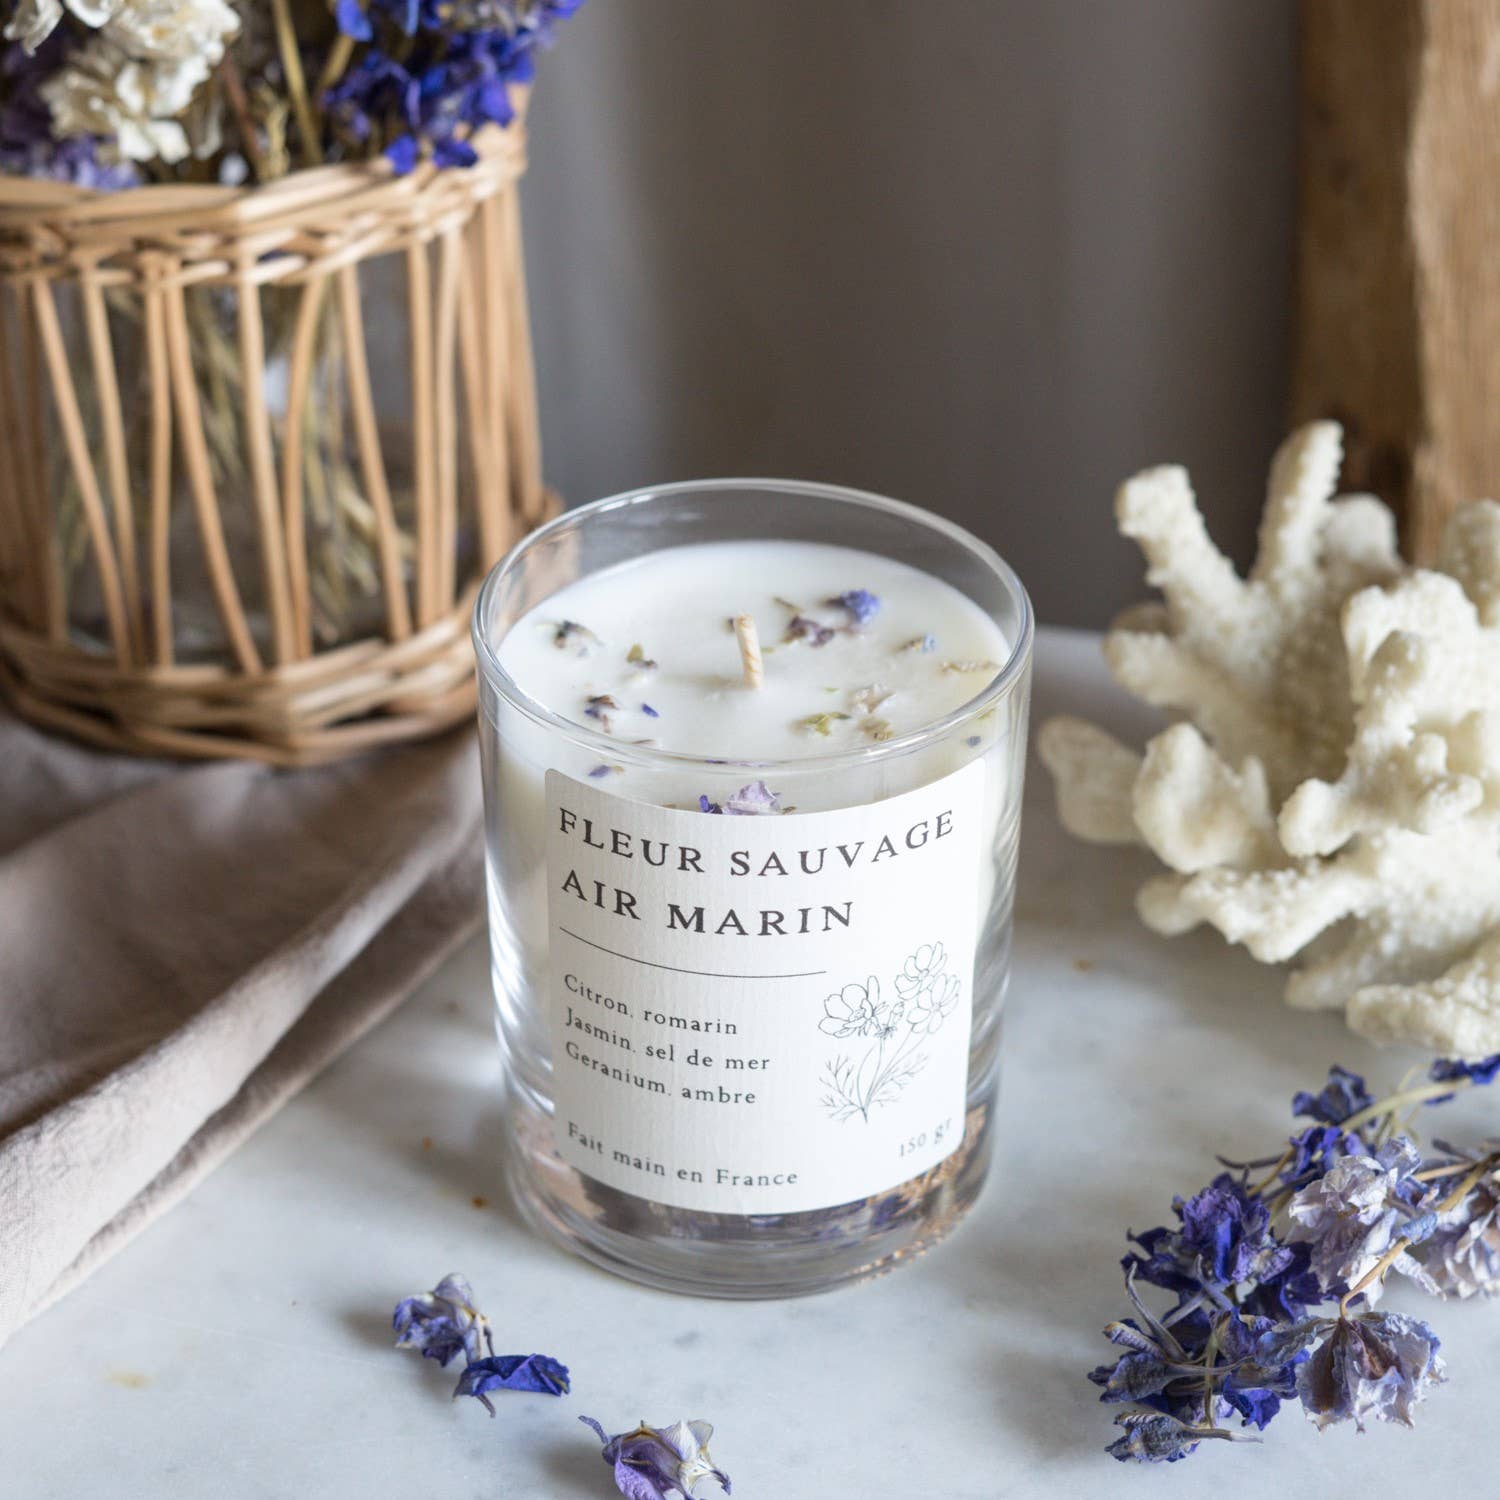 Leaves & Co - Fleur Sauvage Air Marin Bougie  Collection essentielle - Unik by Nature